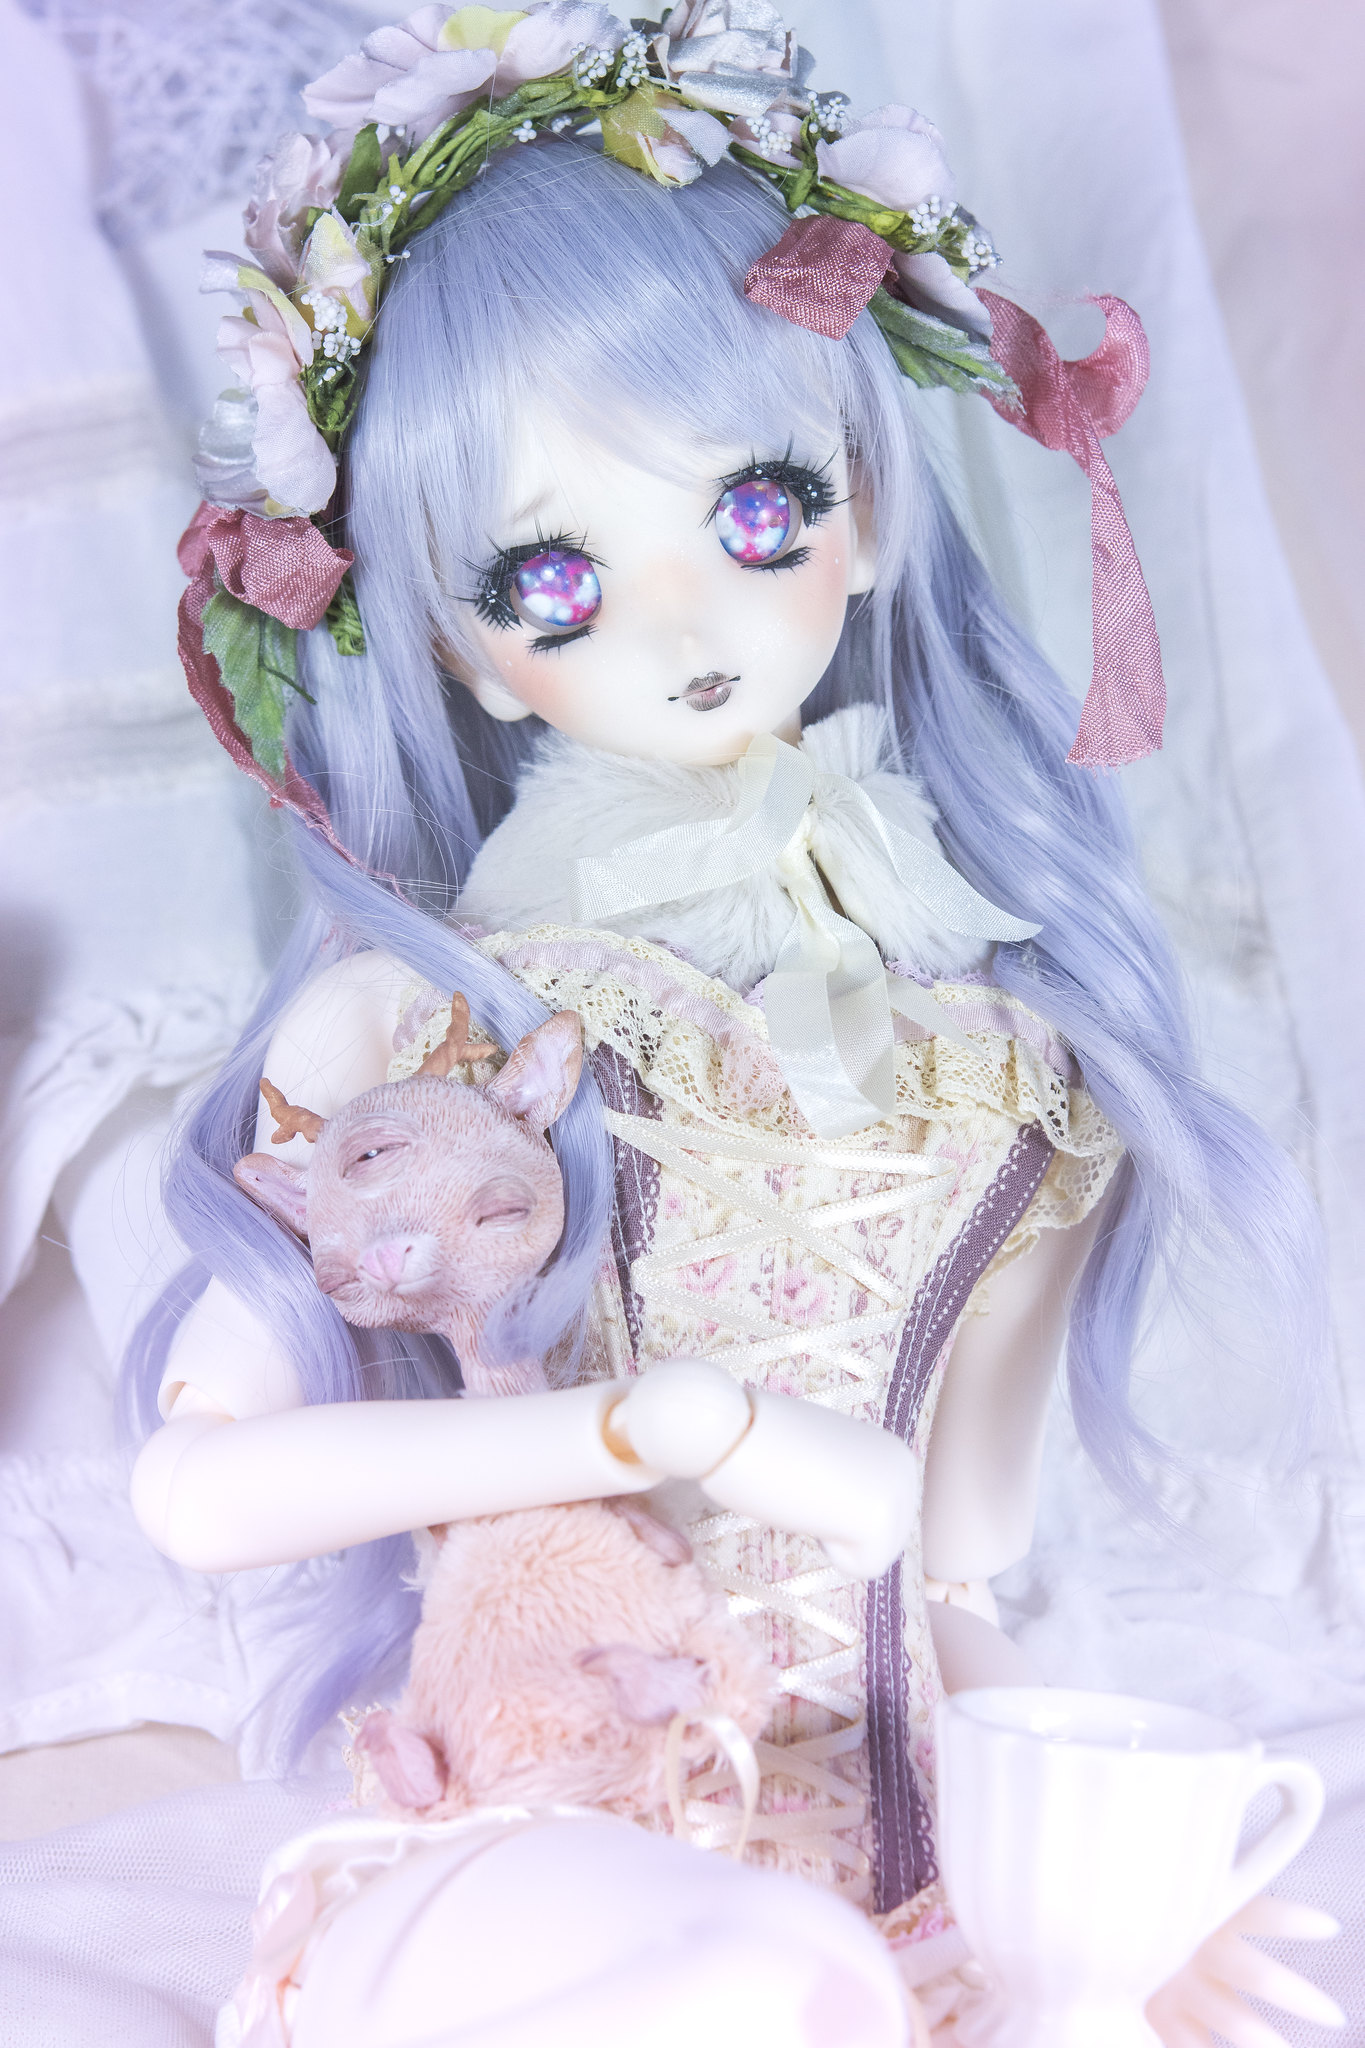 [Dollfie Icon / Dollfie Dream]   ✧* ✧*  Cooking time !  // The Fox Knight  *✧ *✧ - Page 15 32385178267_9c9ed2fa53_k